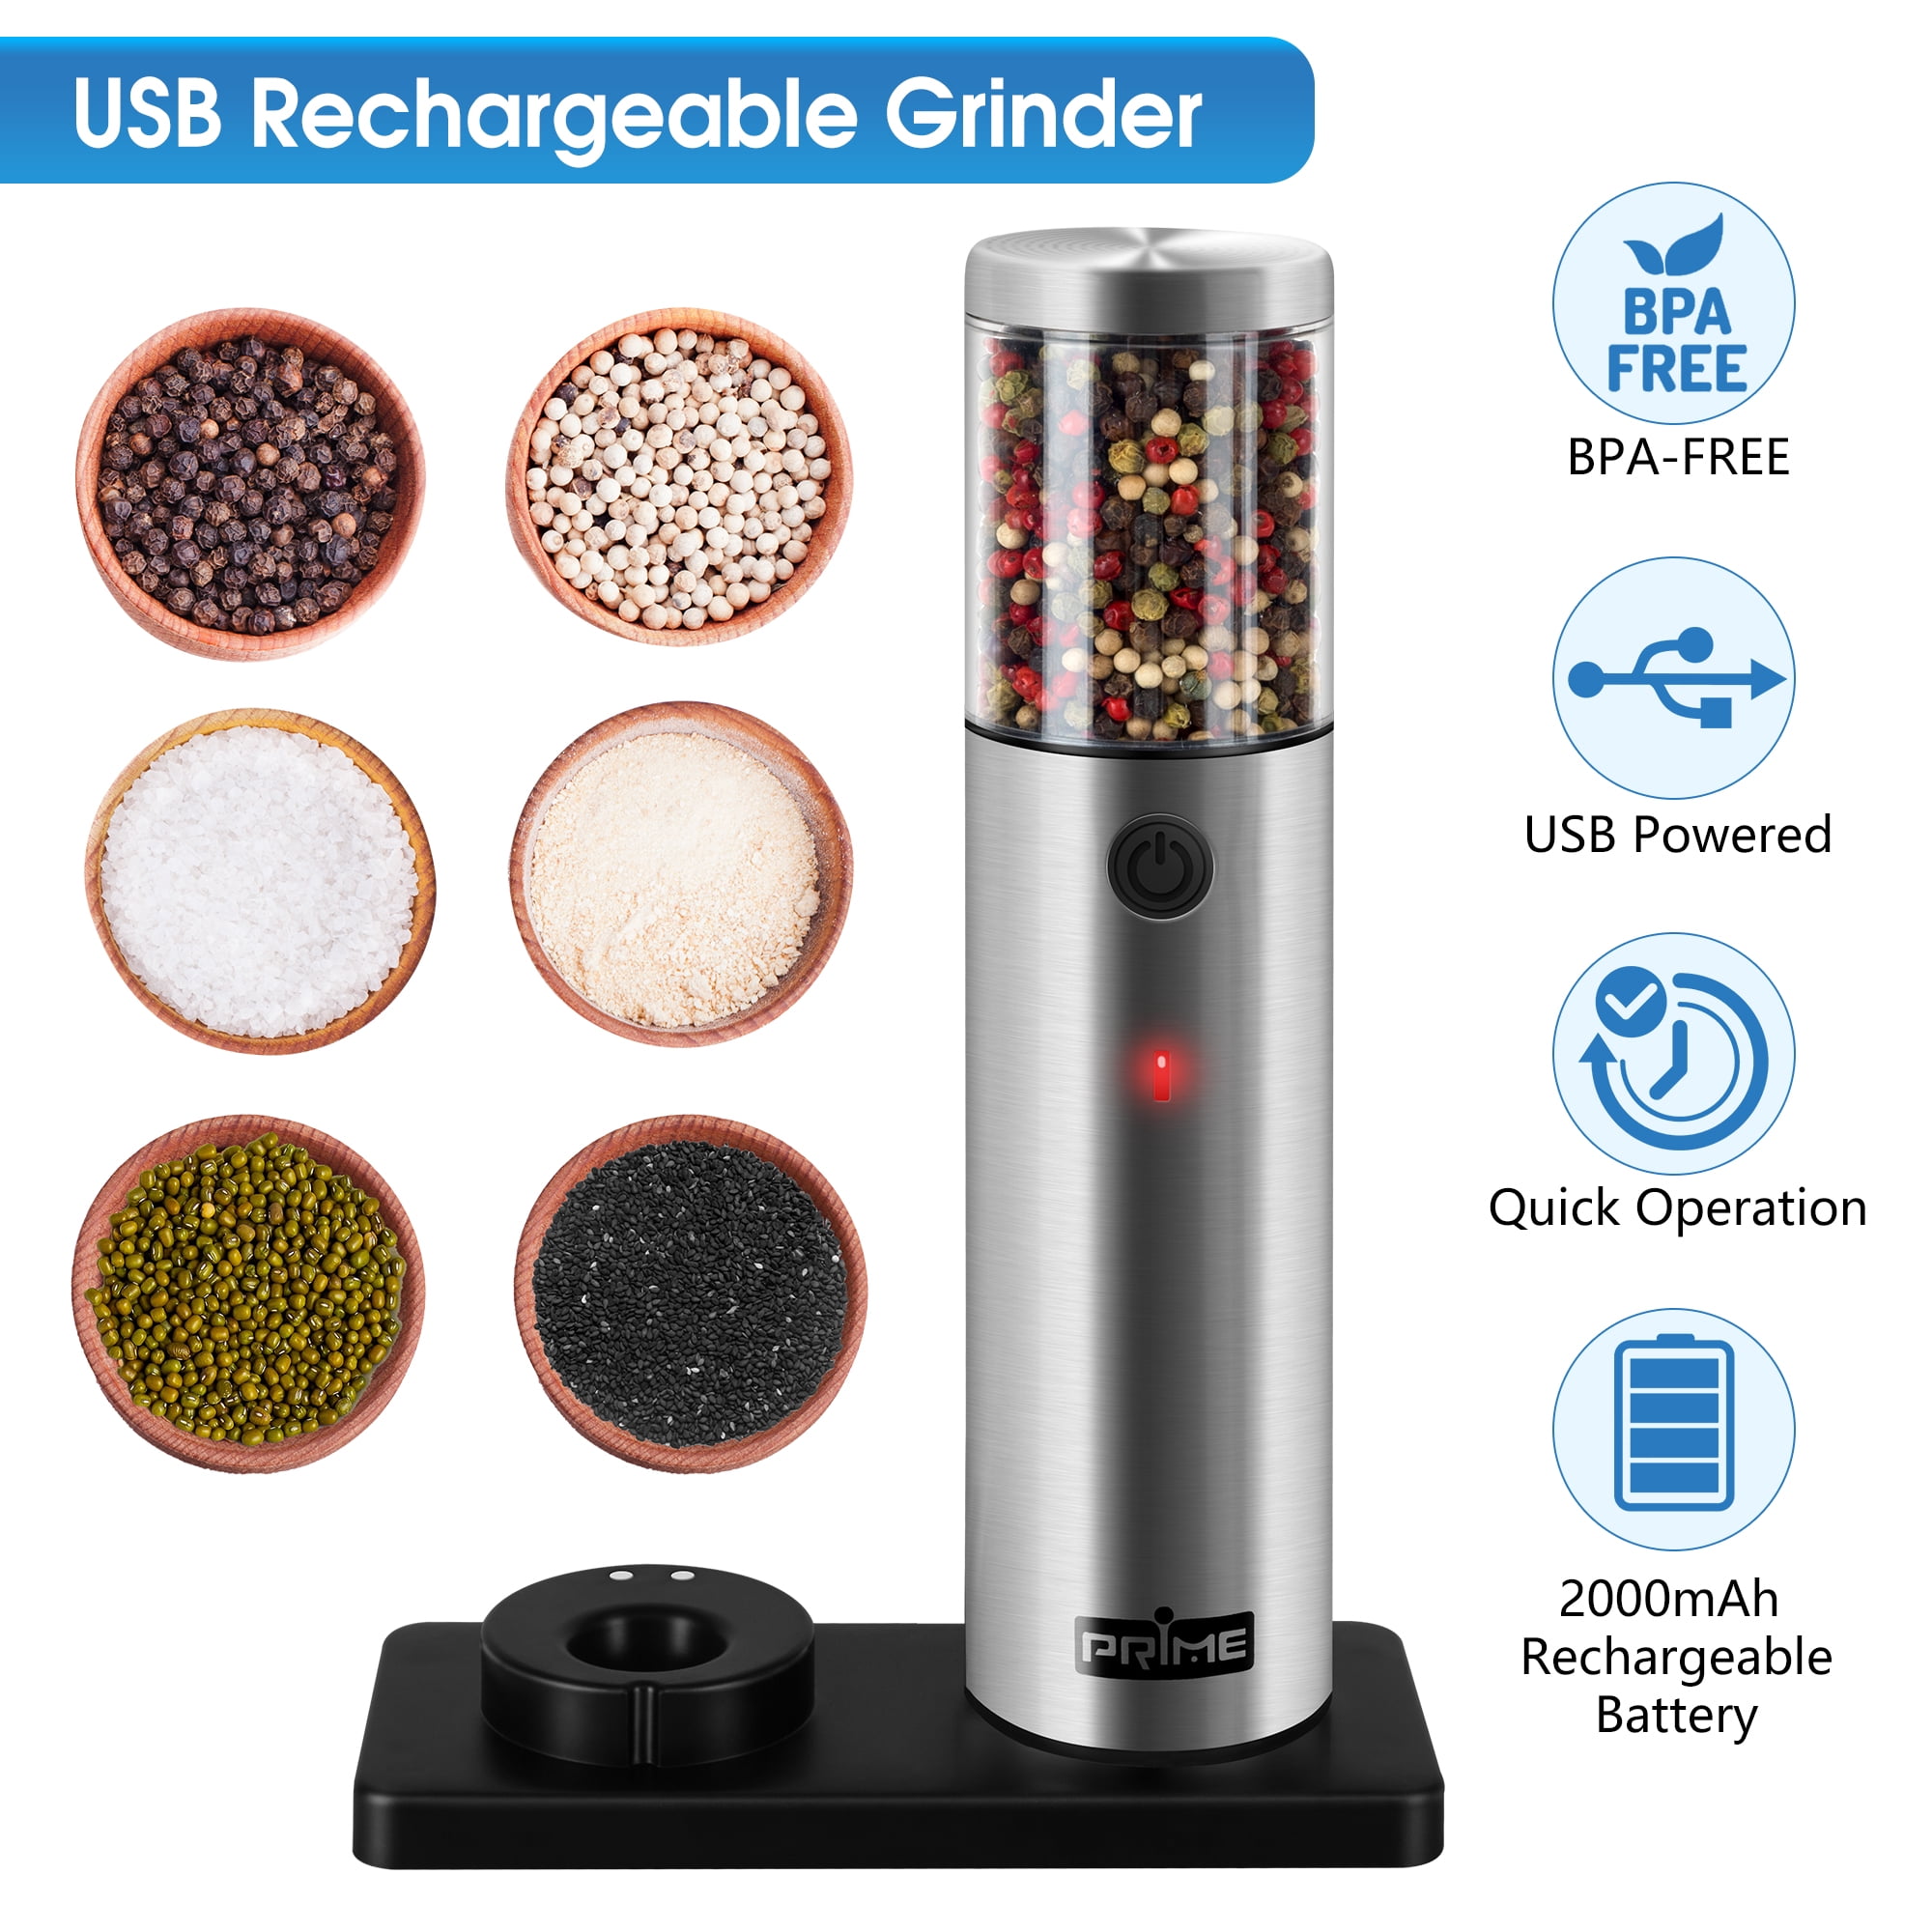 2 Pcs Electric Pepper Grinder Set with USB Cable Charging Base Brush  Rechargeable Salt and Pepper Mill Stainless Steel Automatic Pepper Mill  Adjustable Coarseness Mills for Spice Kitchen Cooking 